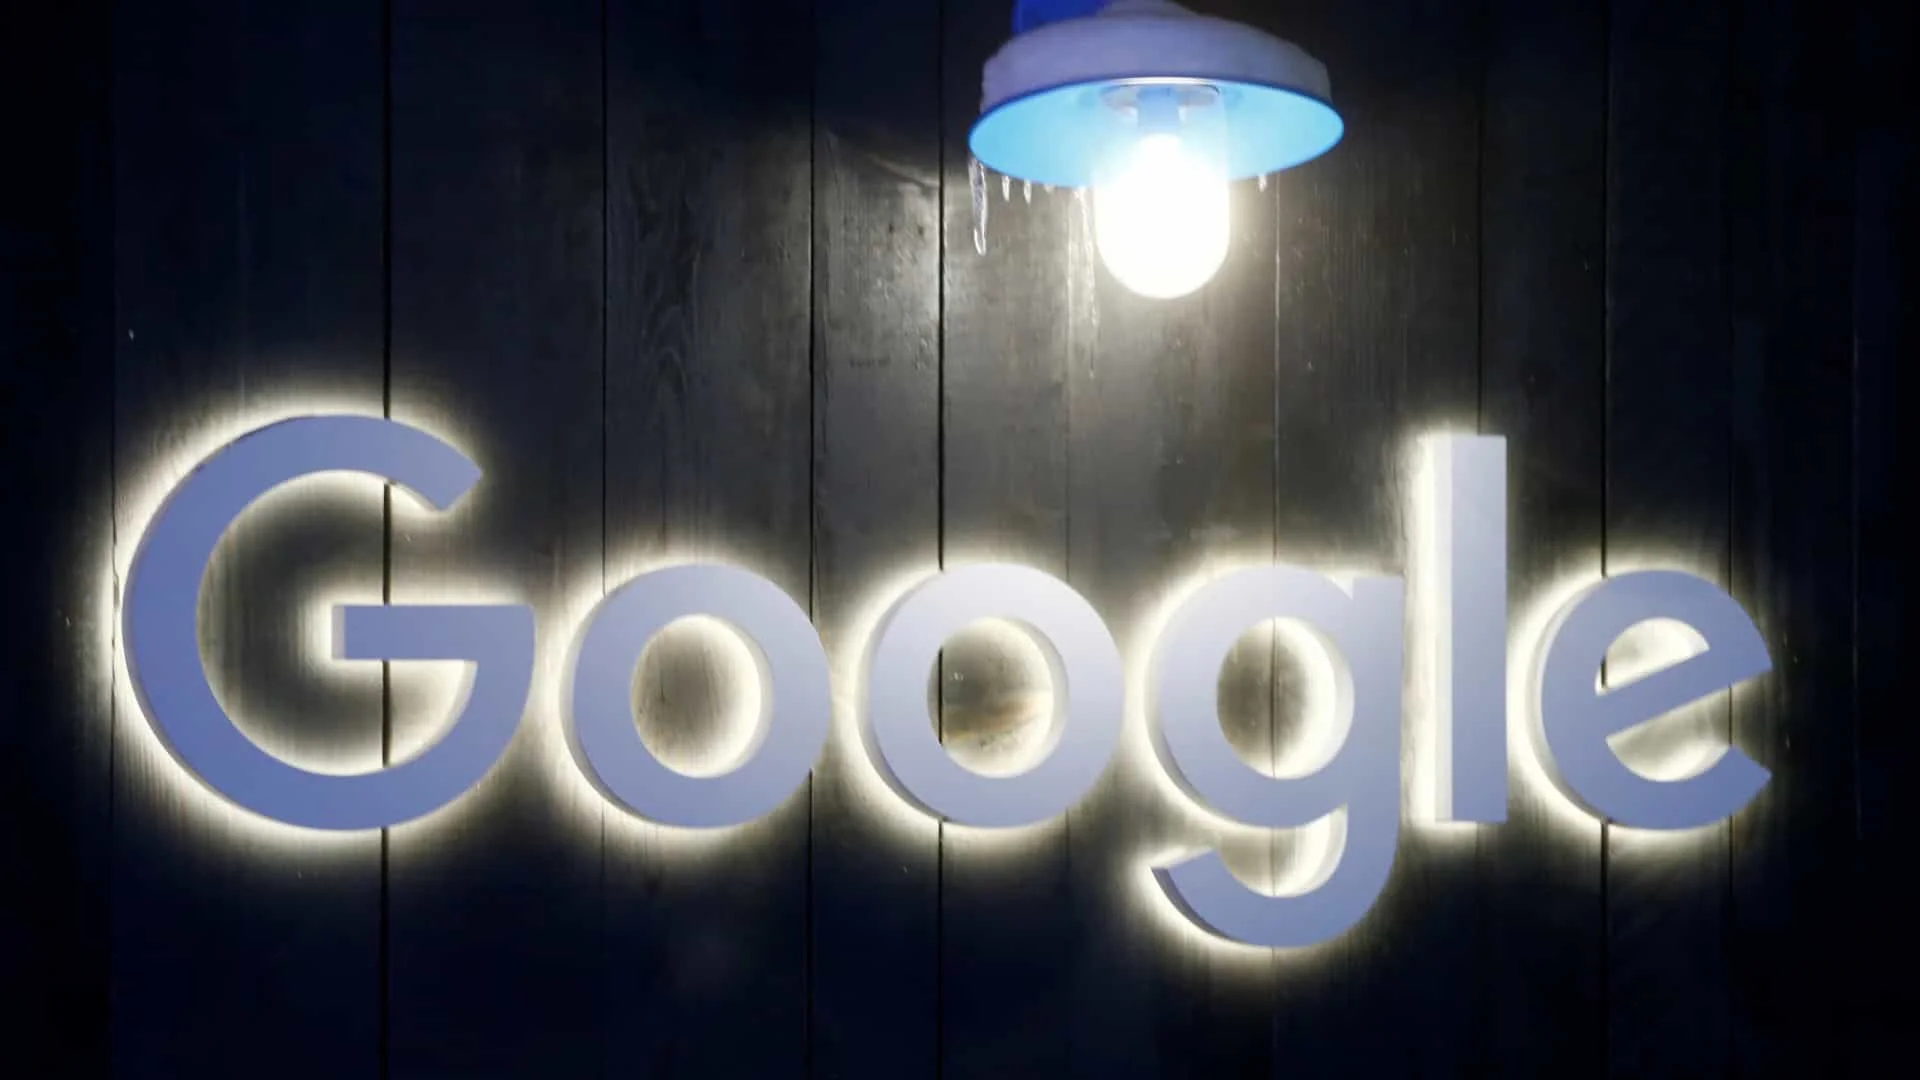 Google released a smart lamp that you can't buy